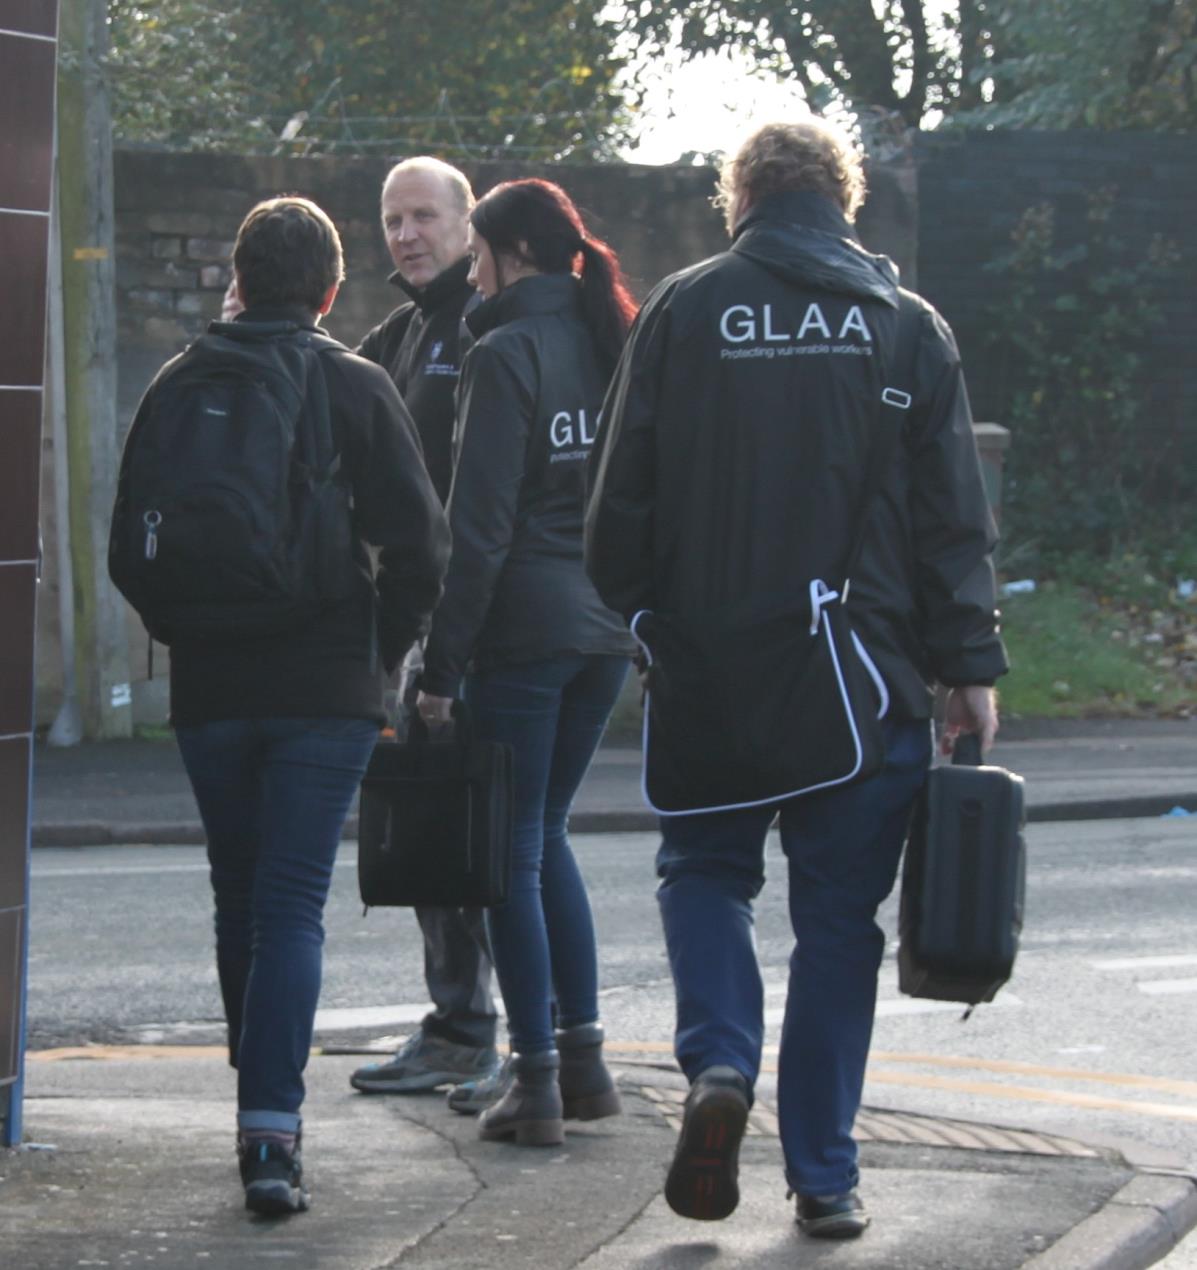 Group of GLAA colleagues on operation cropped